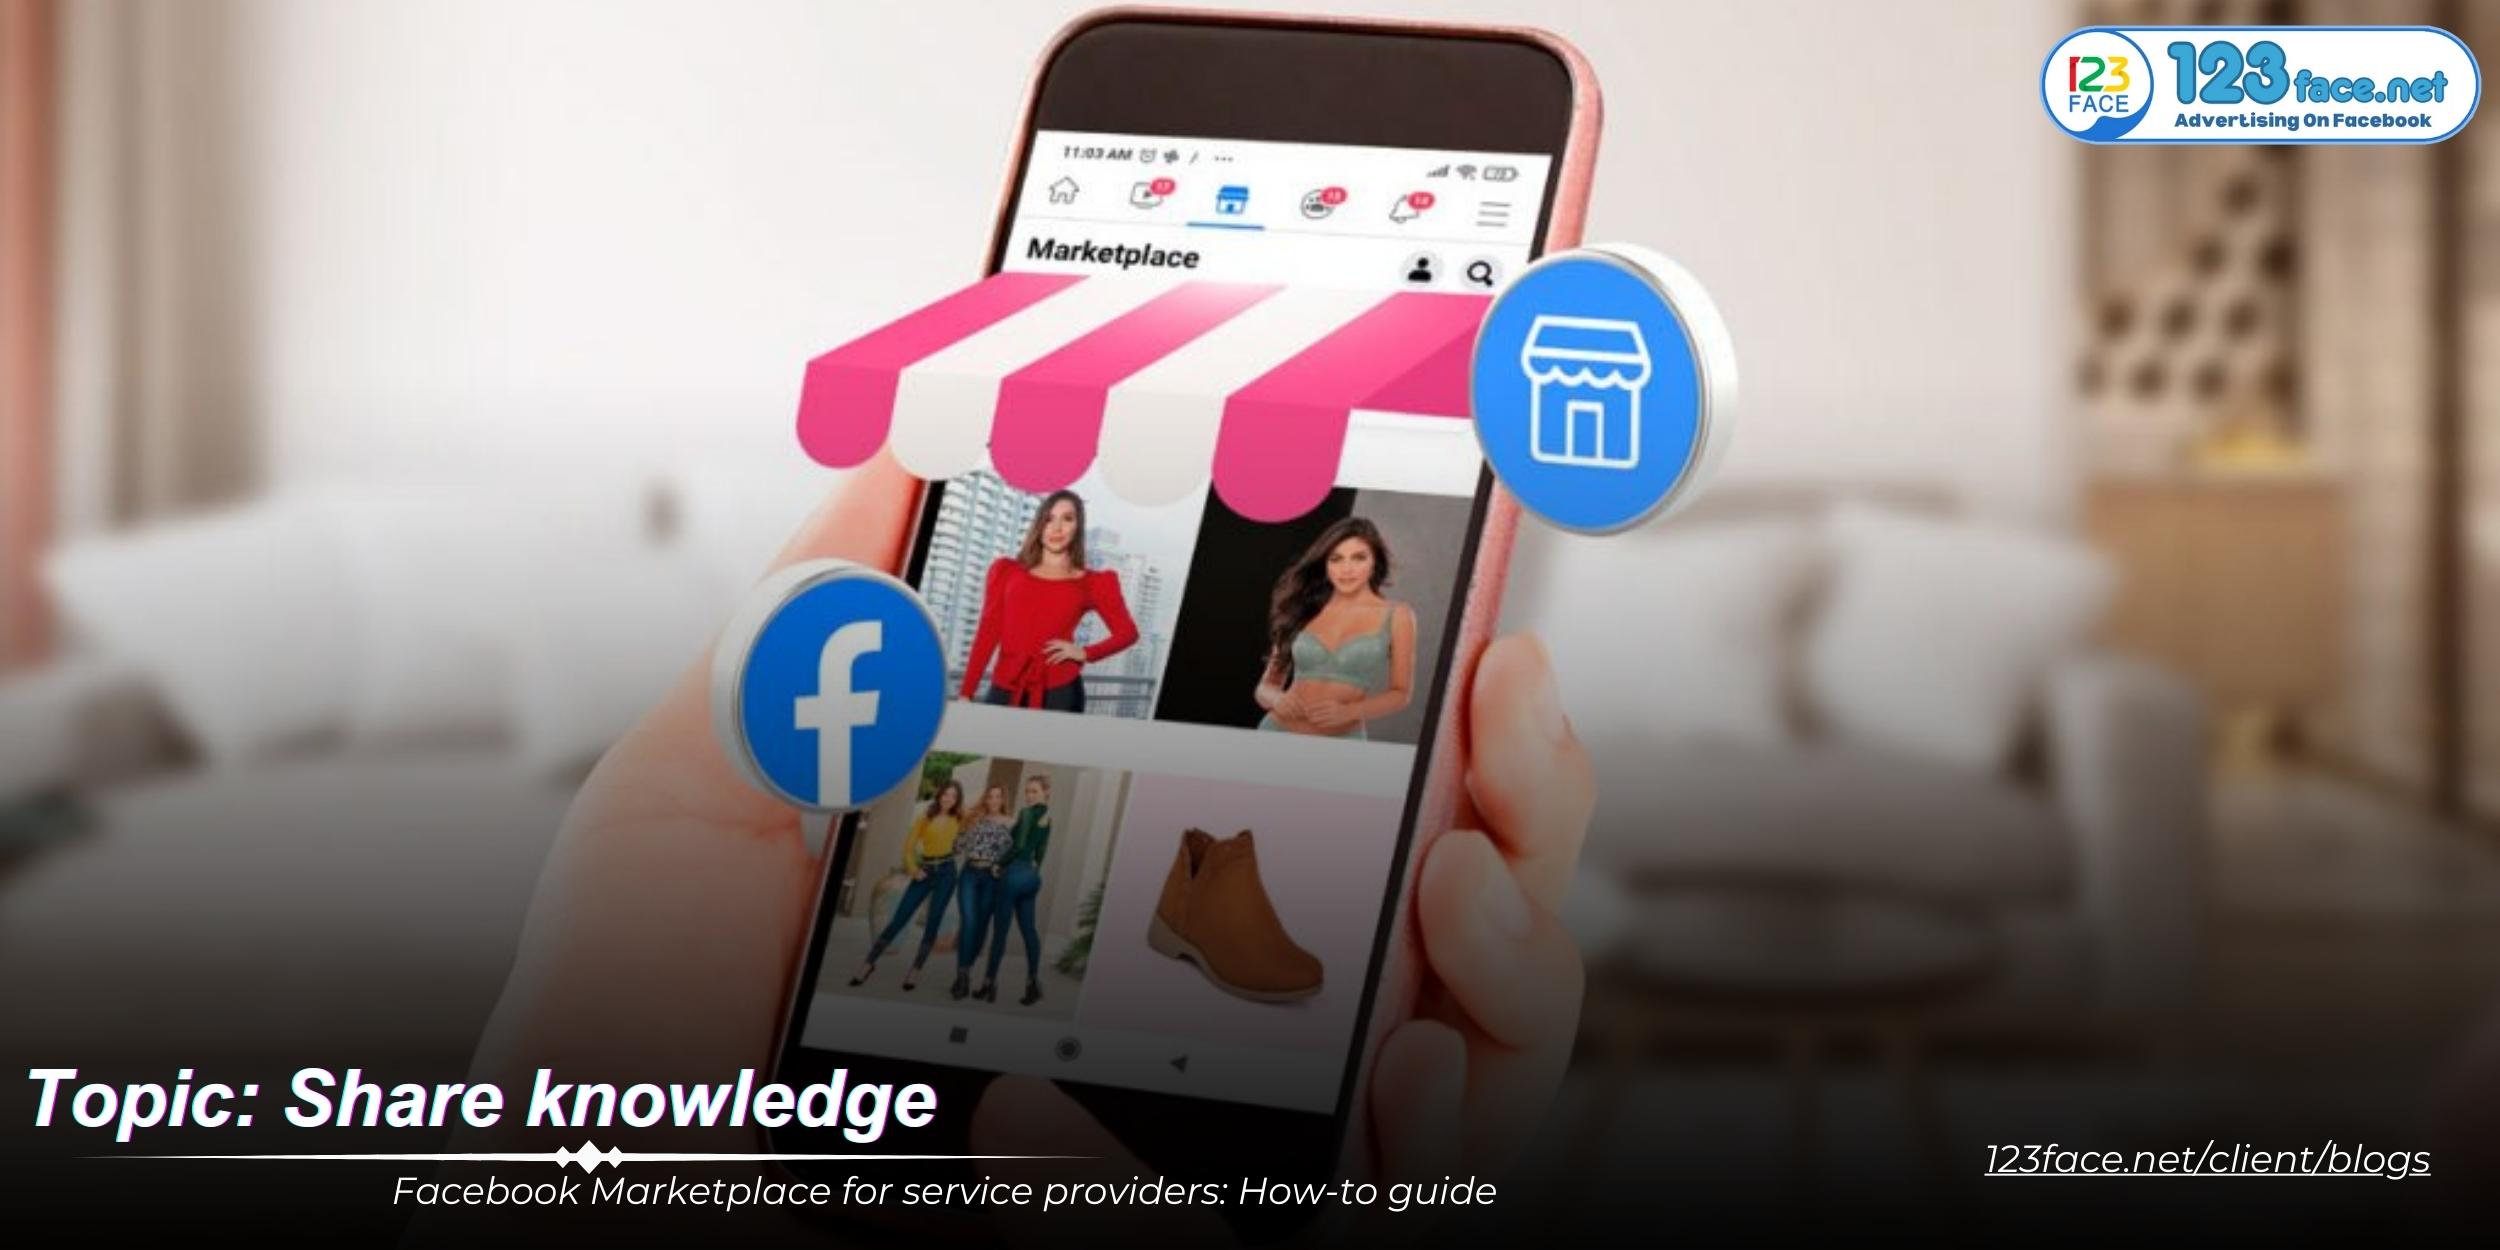 Facebook Marketplace for service providers: How-to guide